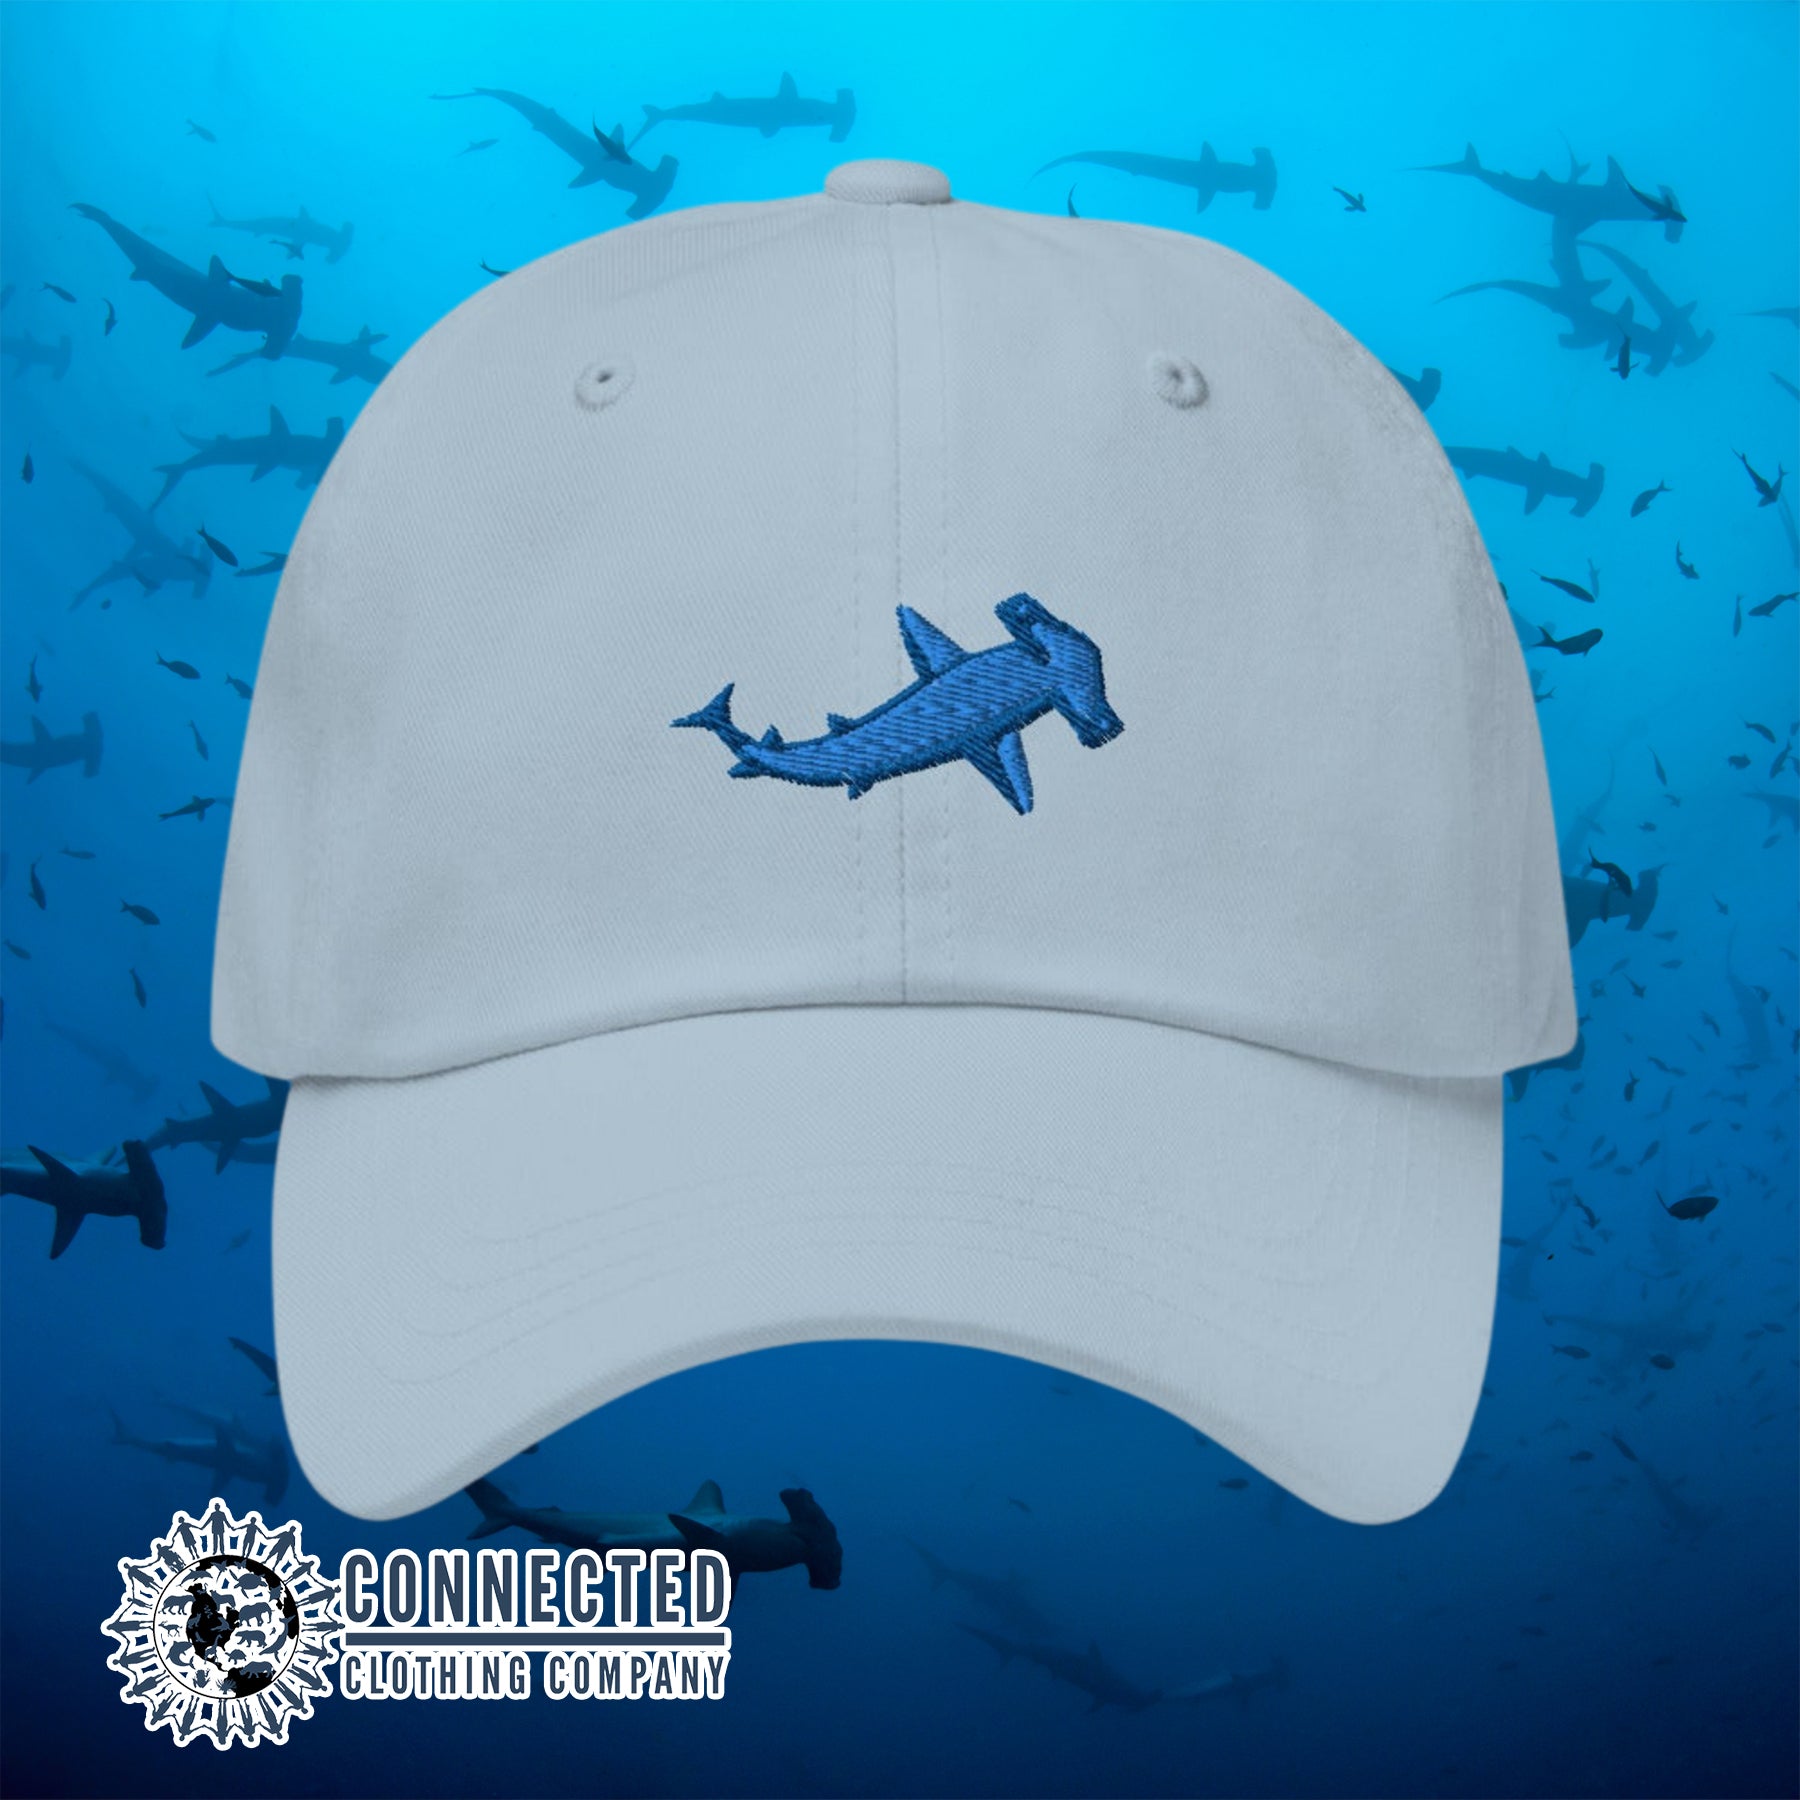 Blue Hammerhead Shark Cotton Cap - sweetsherriloudesigns - Ethical & Sustainable Clothing That Gives Back - 10% donated to Oceana shark conservation